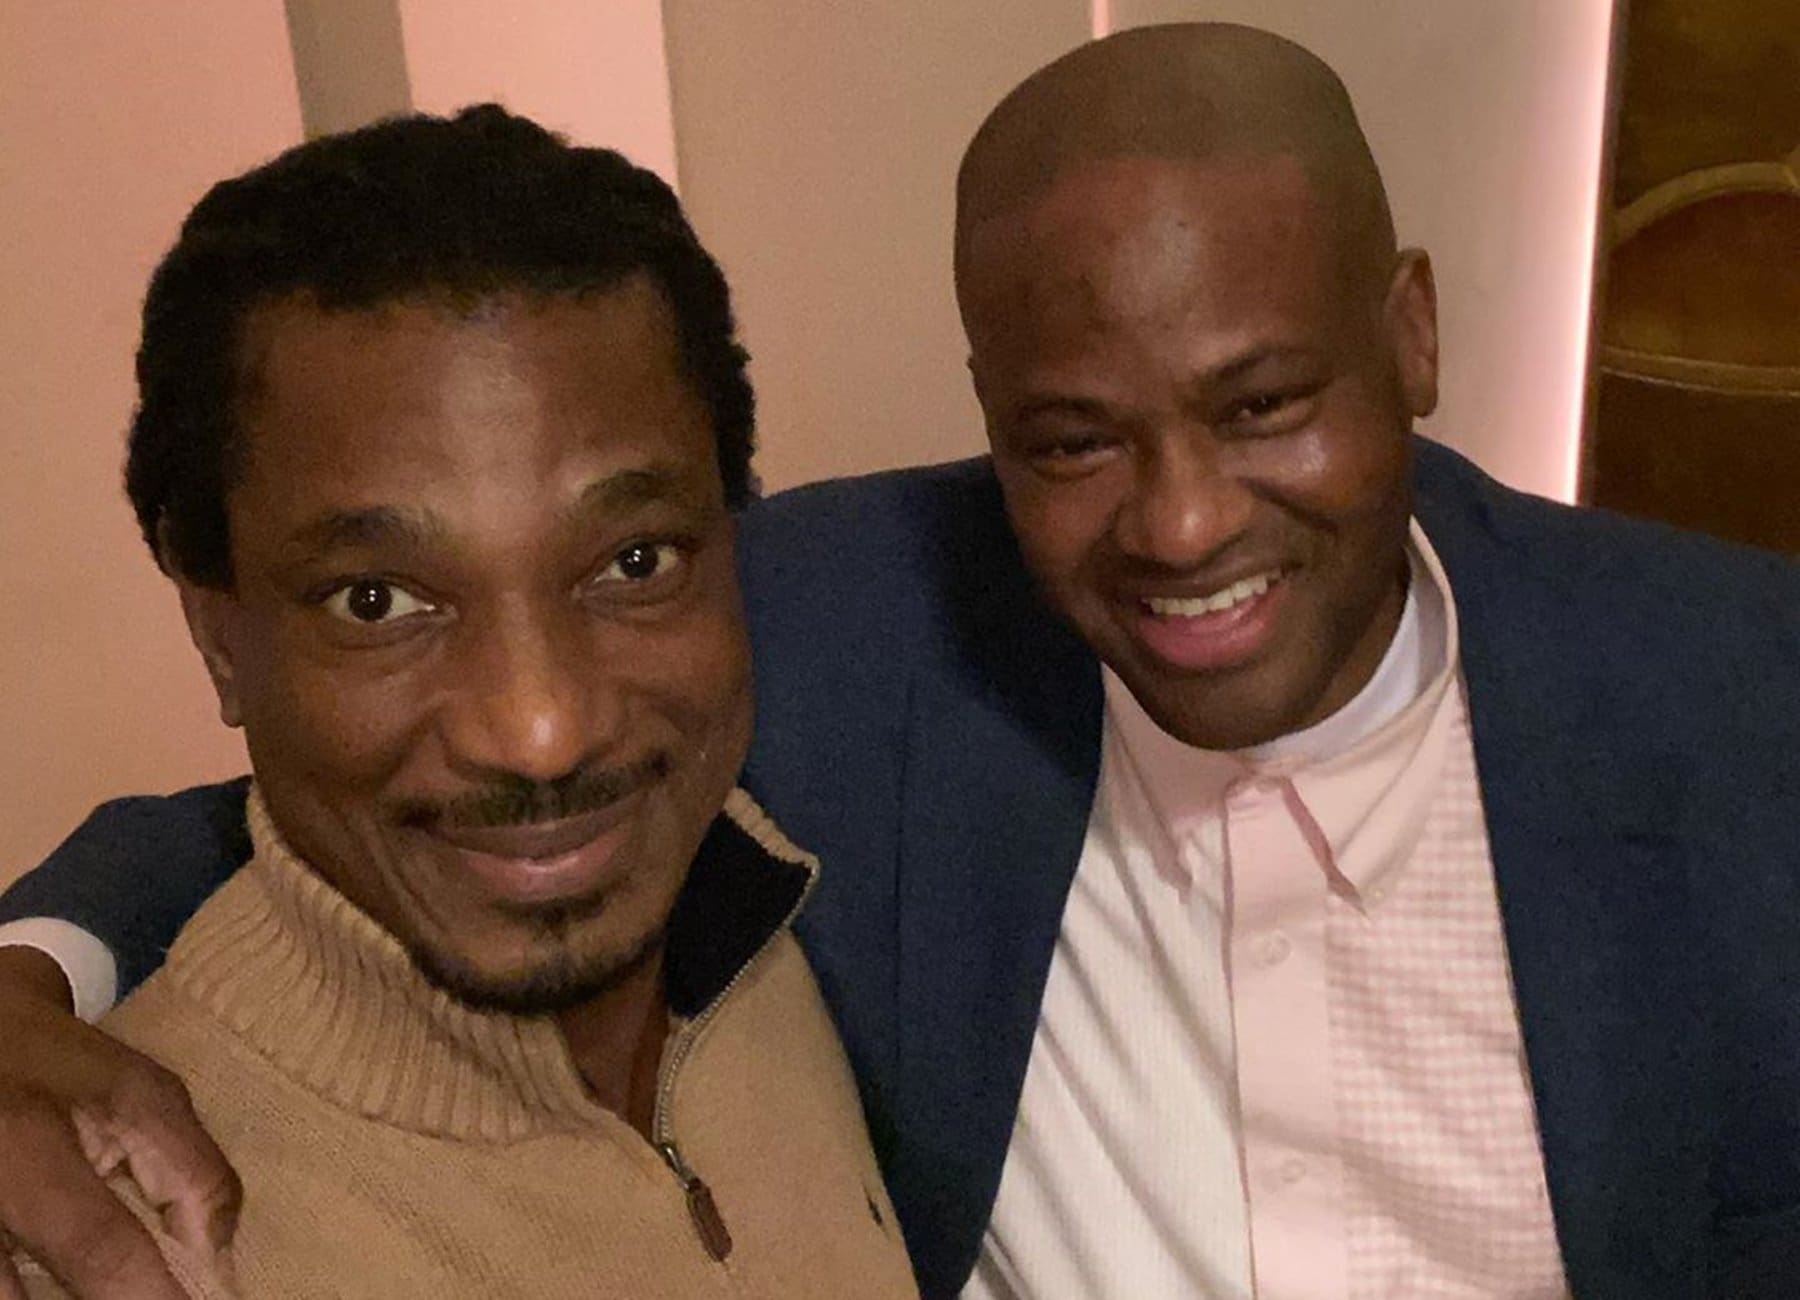 David Adefeso Shocks Fans By Posting A Photo With Vincent Herbert - These Two Have A Great Time Hanging Out Together